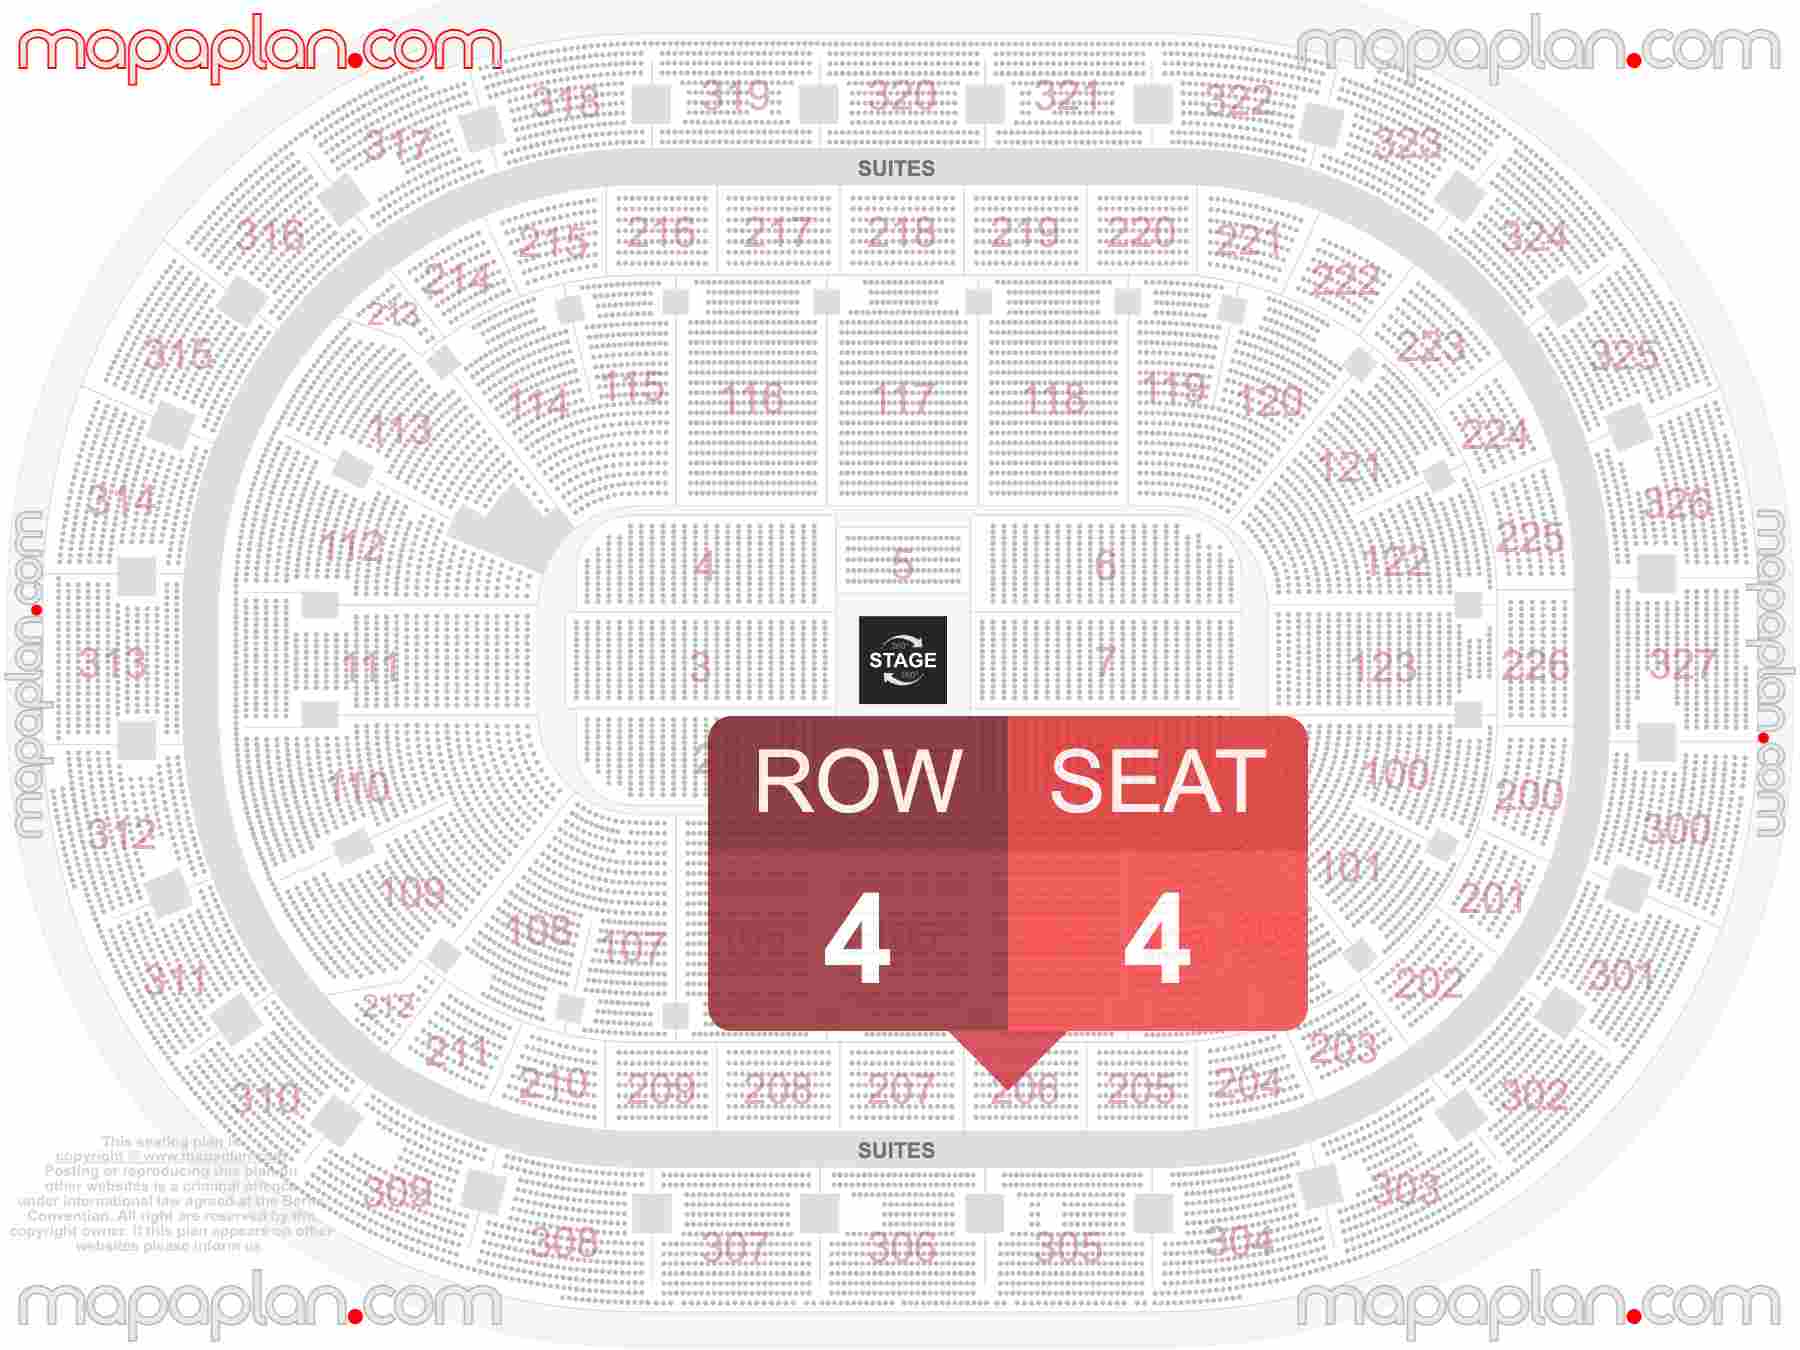 Buffalo KeyBank Center seating chart Concert 360 in the round stage detailed seating chart - 3d virtual seat numbers and row layout